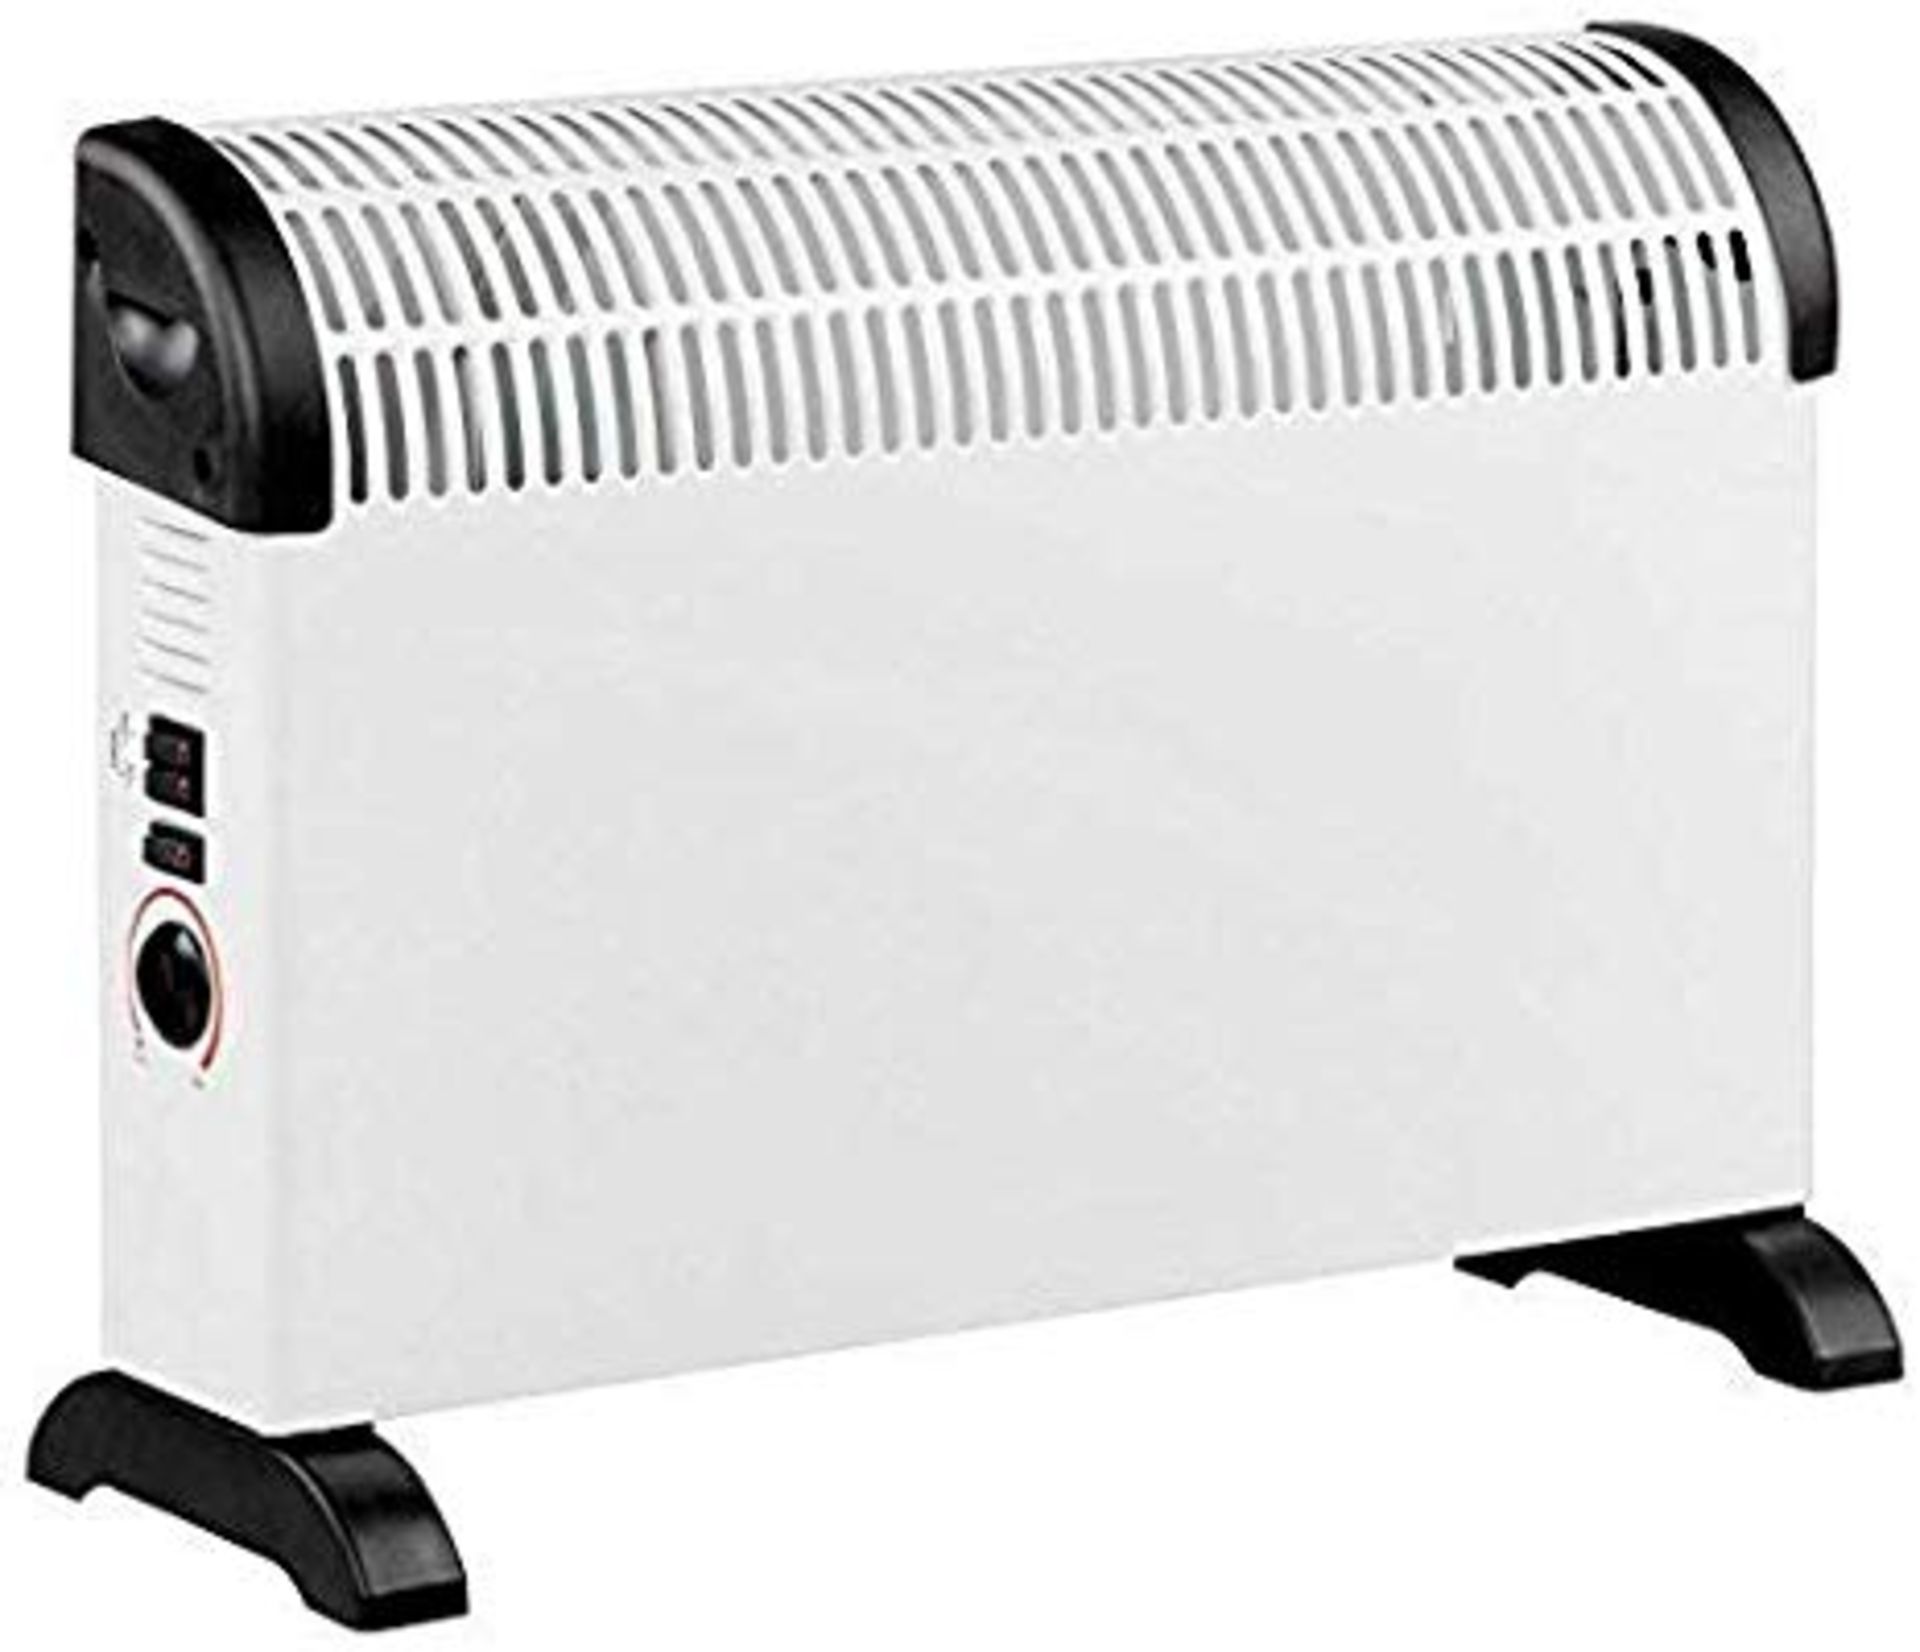 + VAT Brand New 2000w Convector Heater-Turbo Boost-Overheat Protection-Adjustable Thermostat -